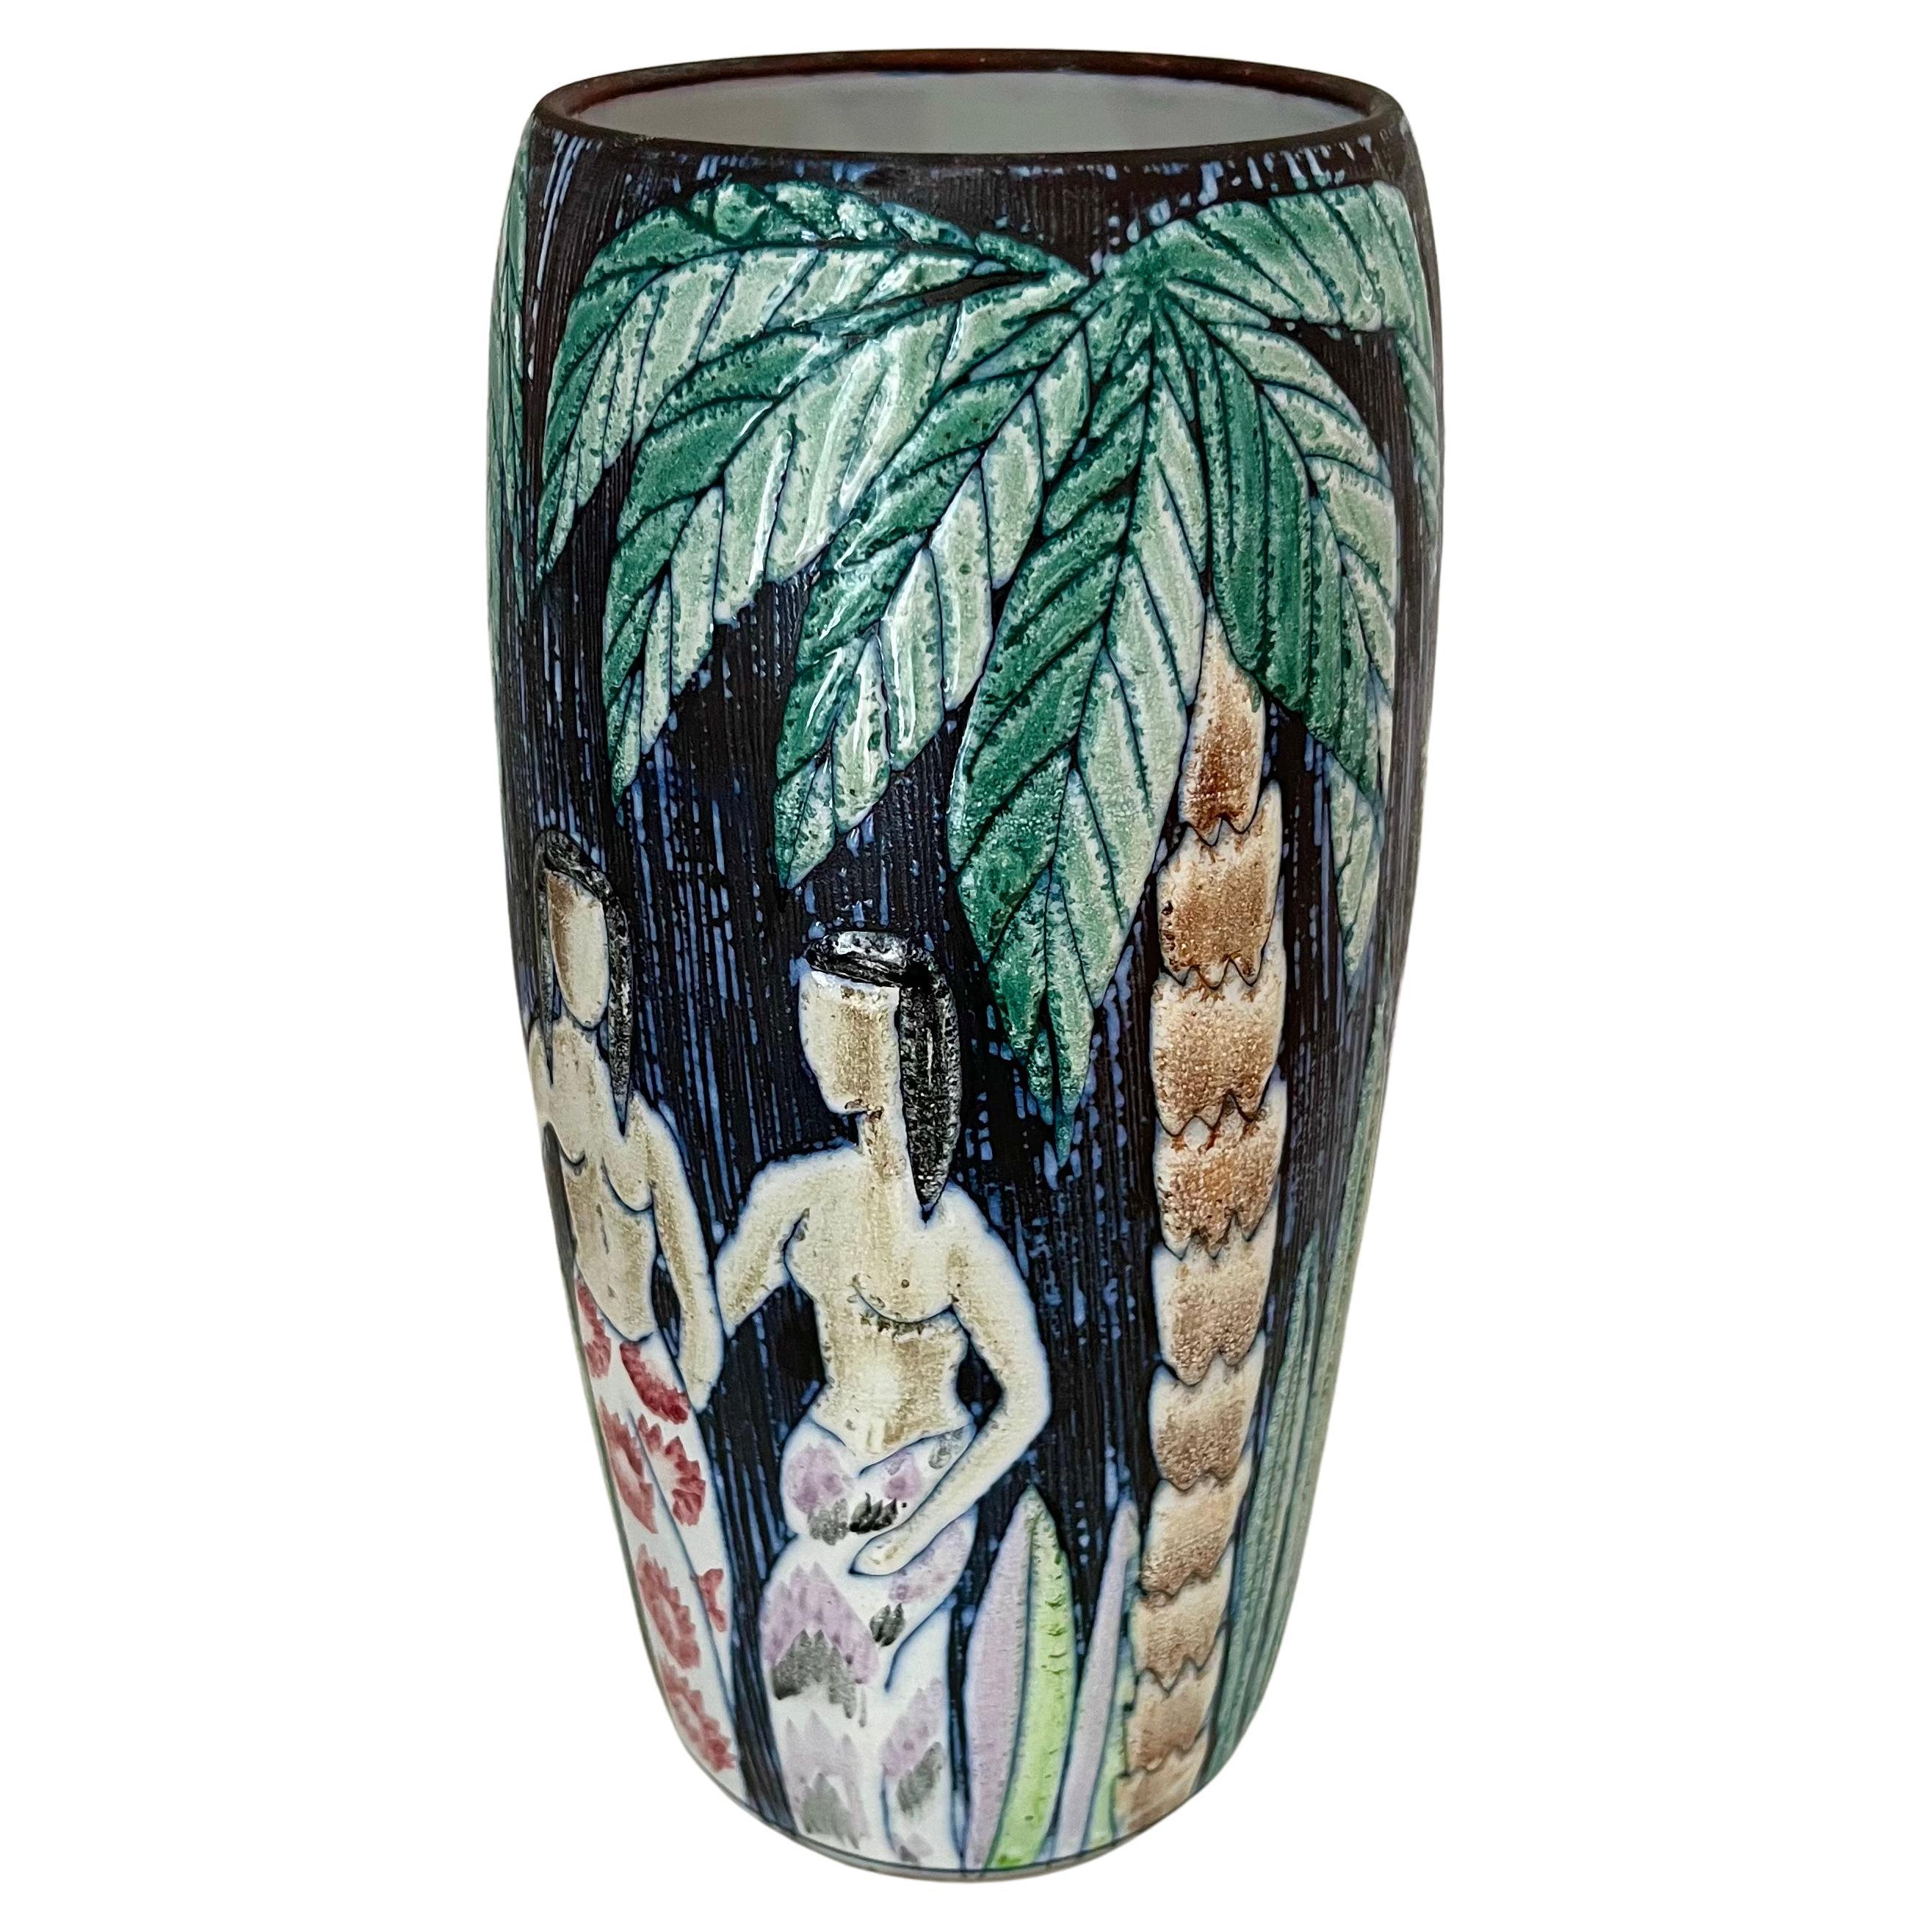 1960s Swedish hand decorated vase by Alingsås Ceramic with palm, flowers & women